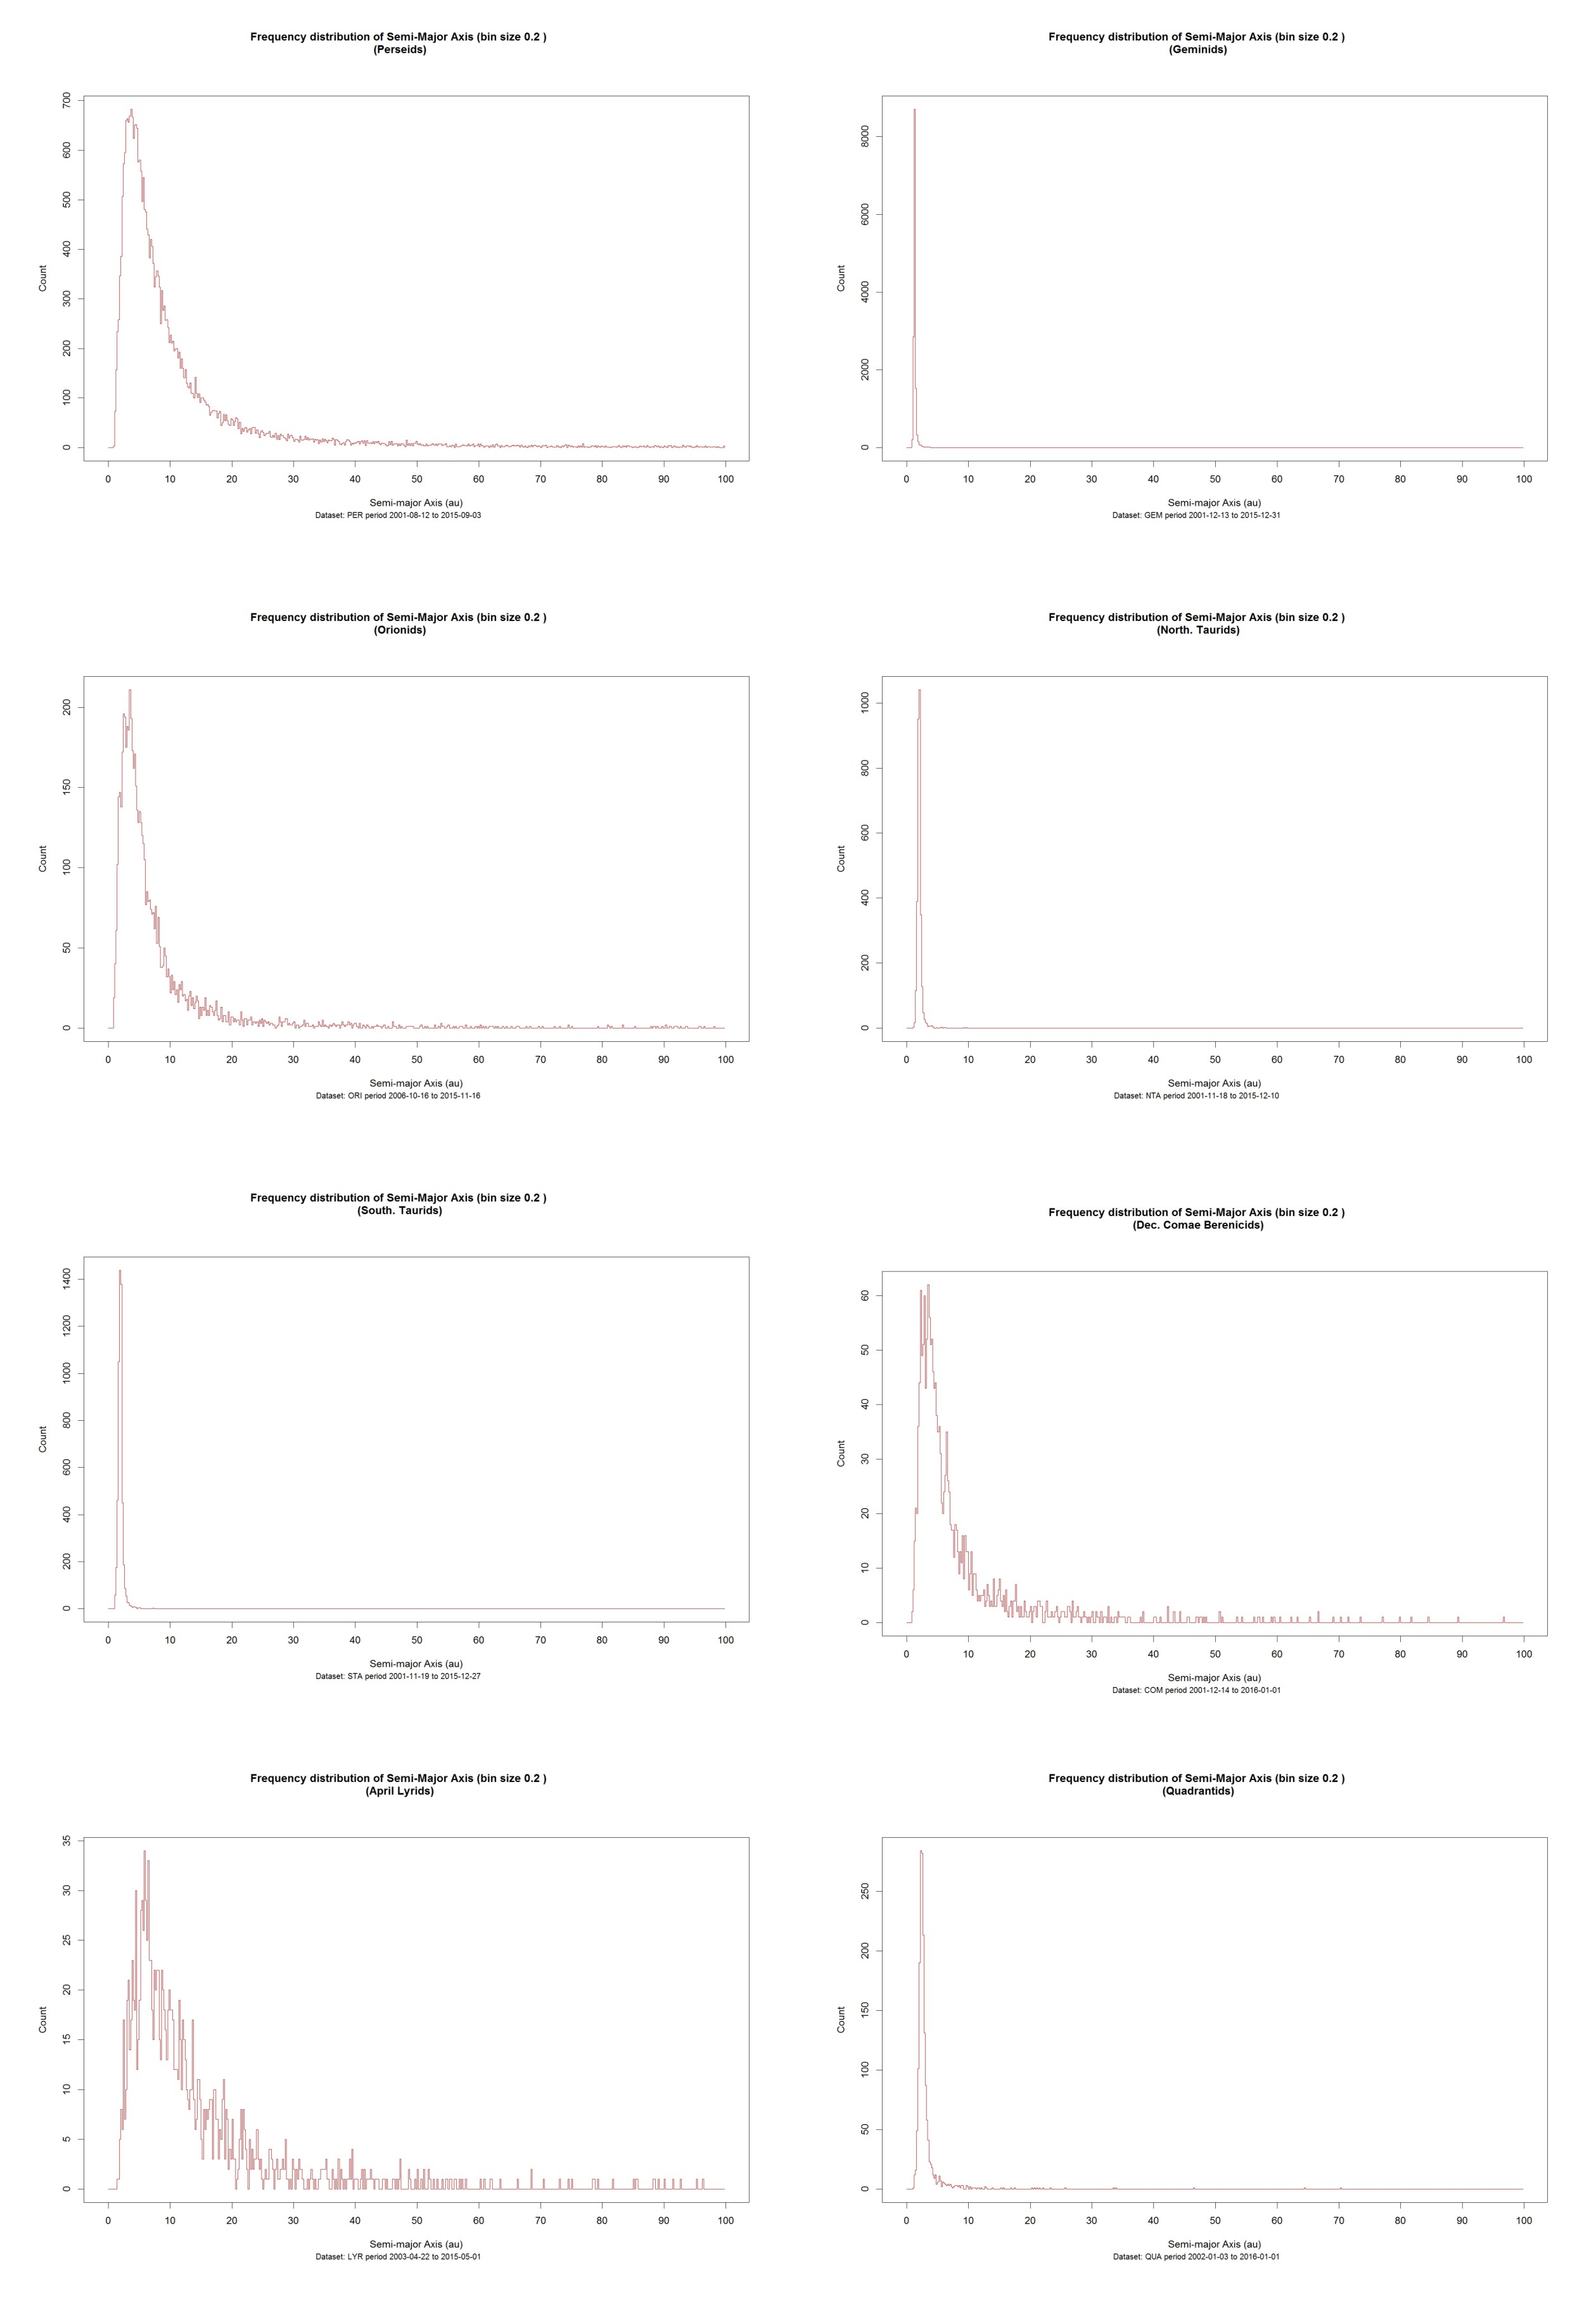 Figure 13: Frequency distribution of semi-major axis (a) with a fixed (configurable) bin size